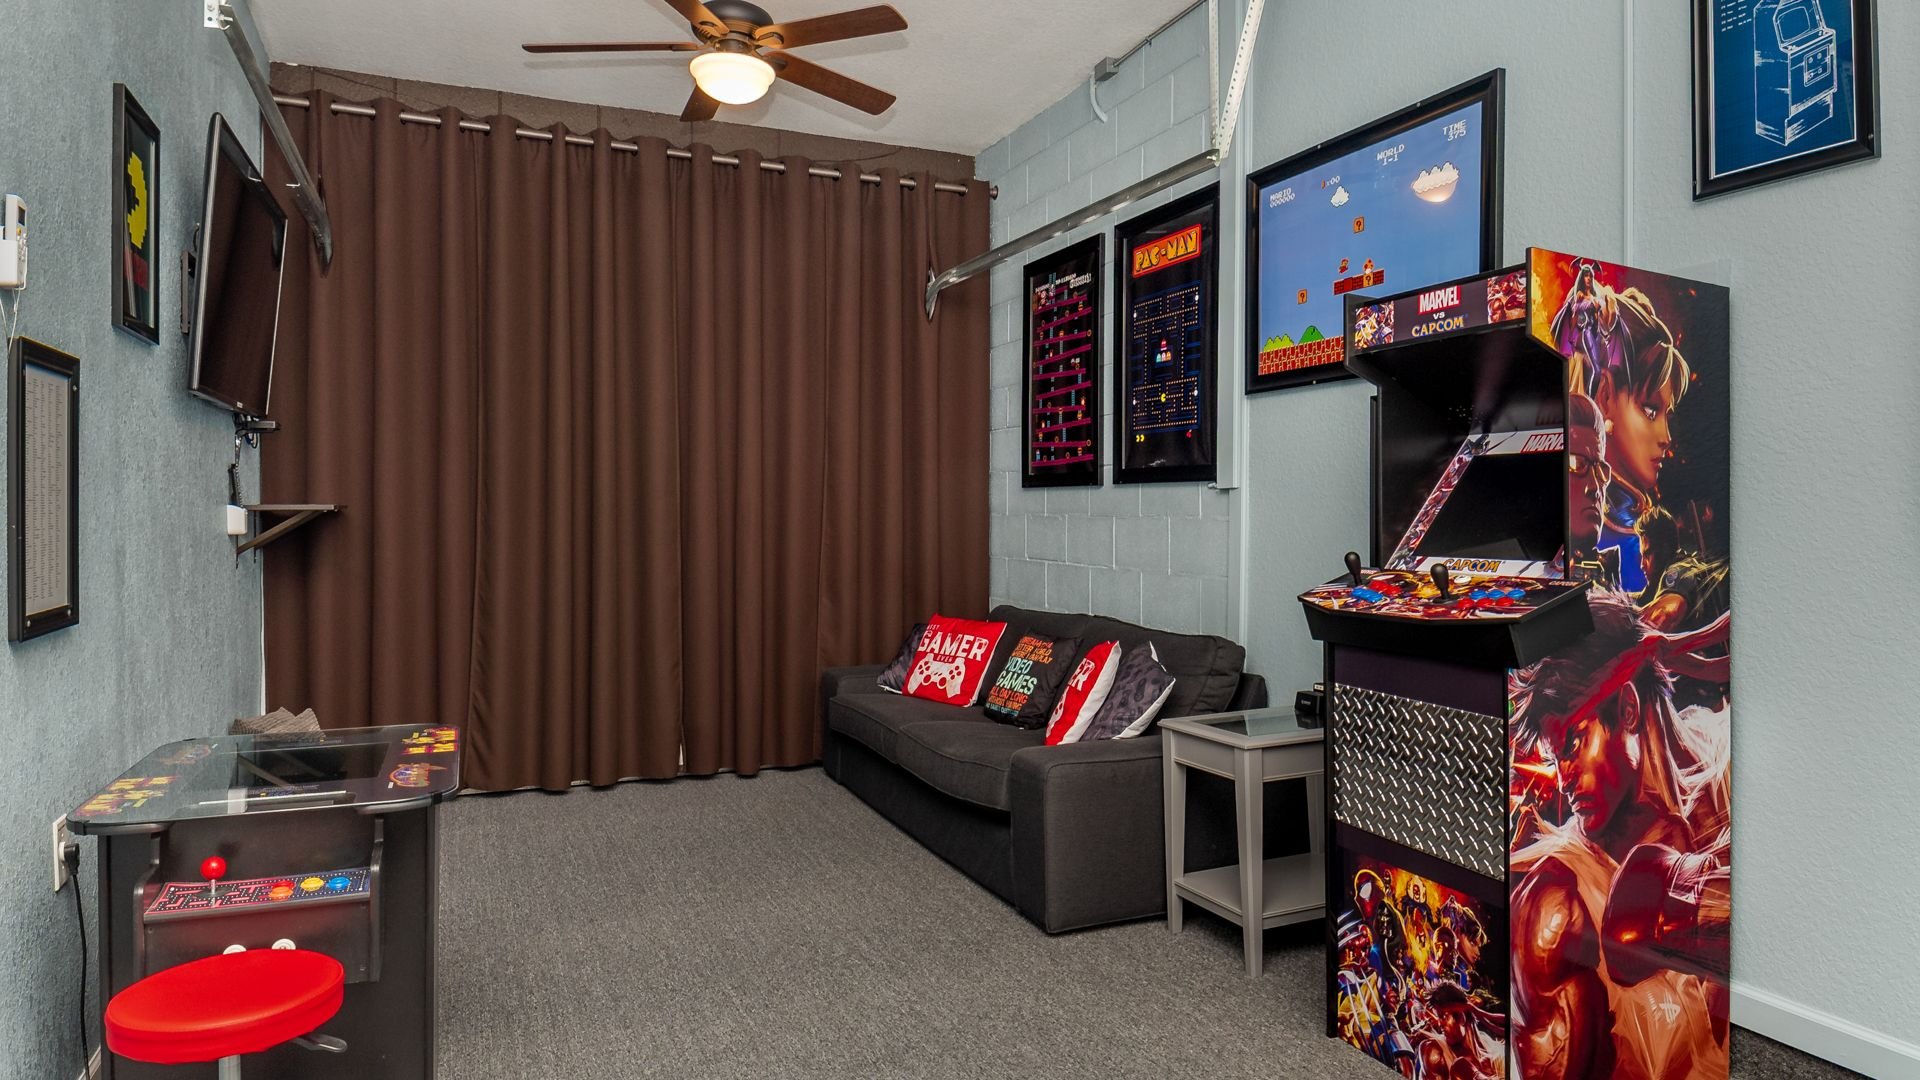 Game Room 
Marvel Video Arcade with multiple game options.
Pacman Video Arcade with multiple game options.